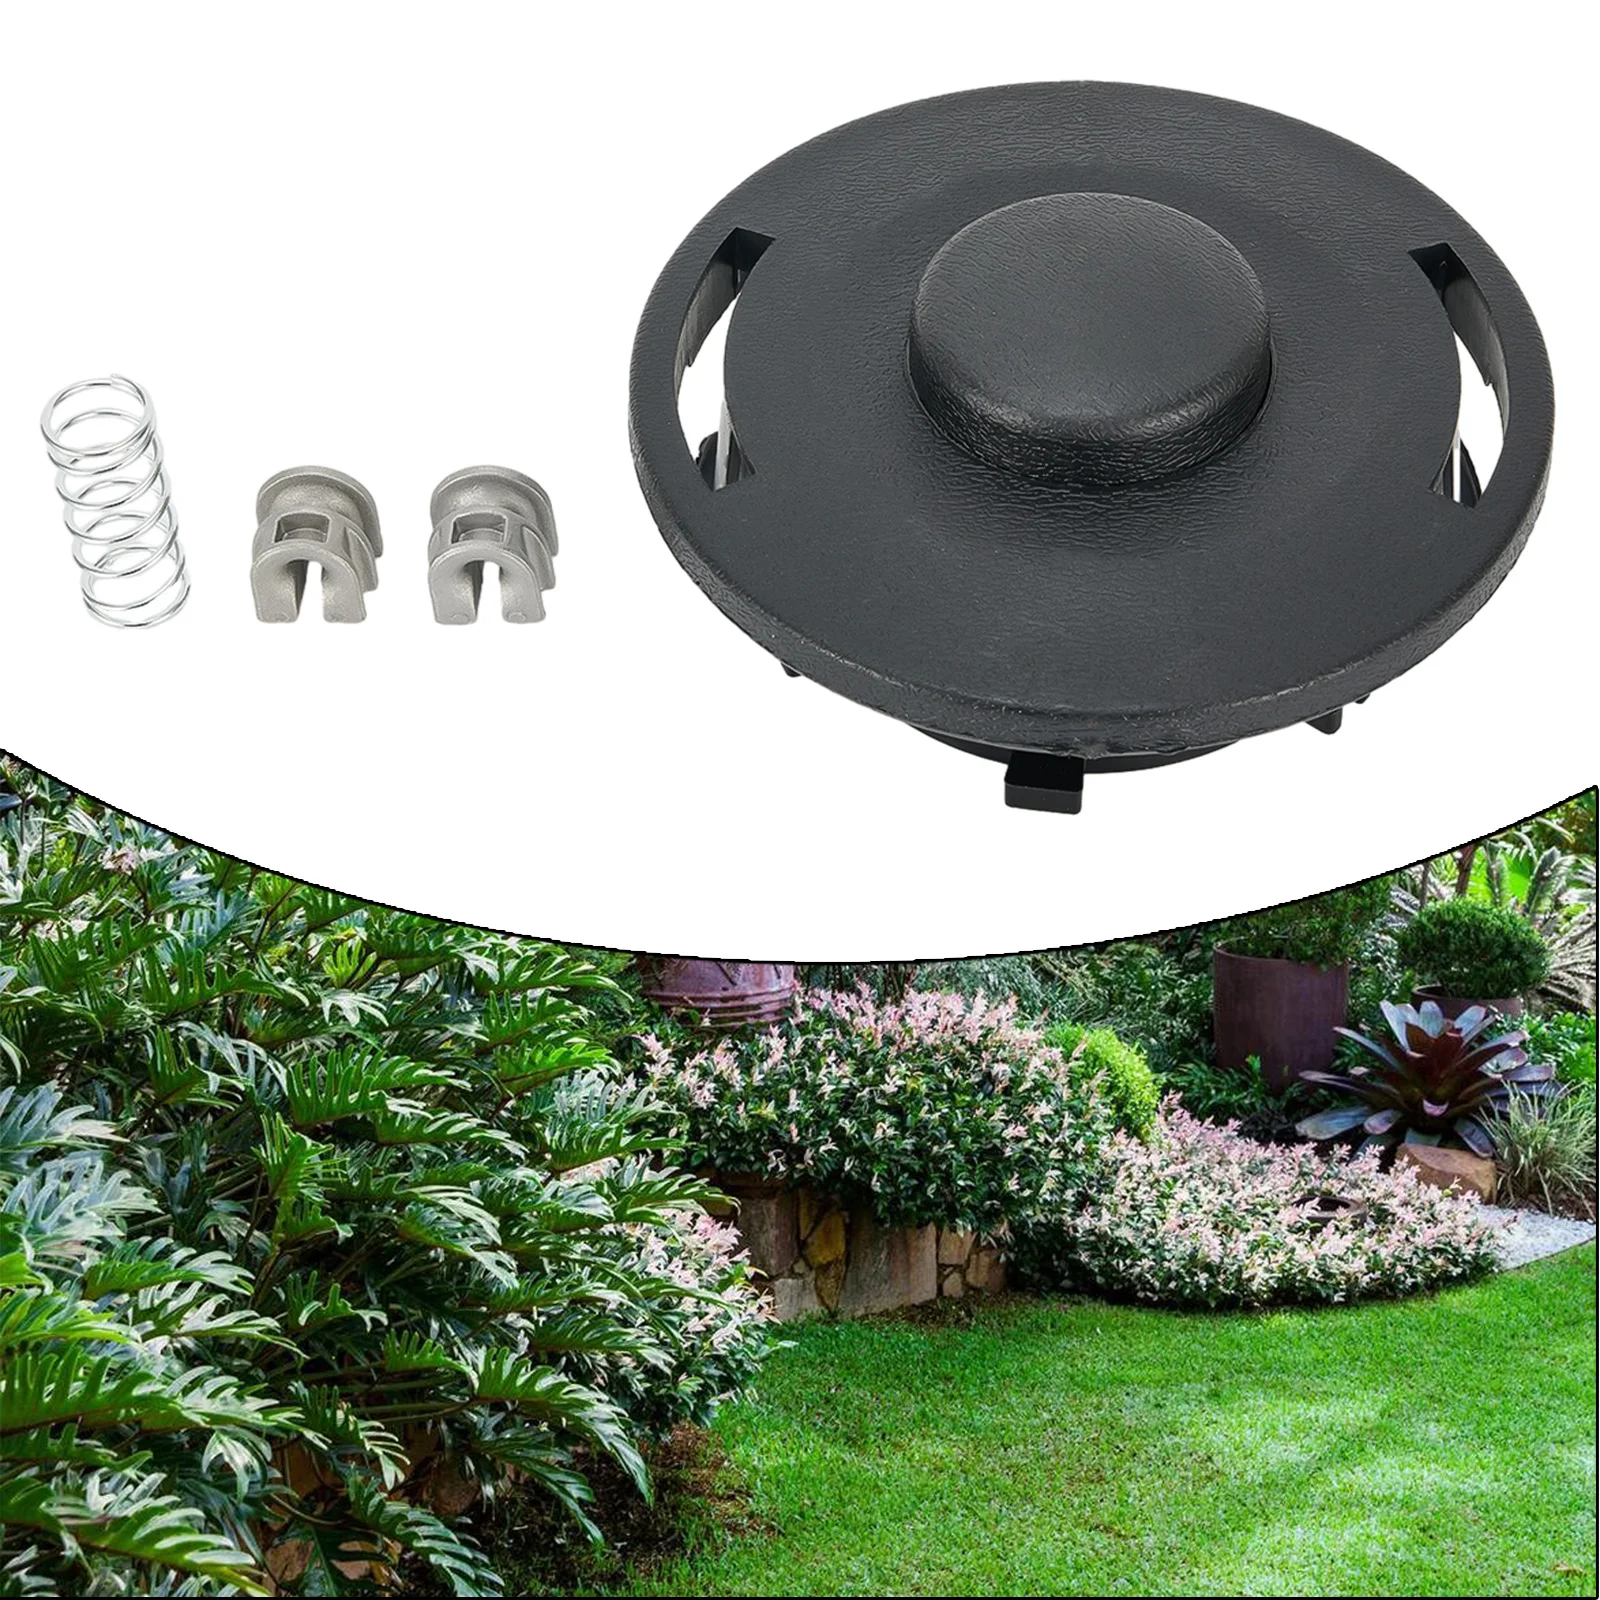 

High Quality Brand New Spool Trimmer Head For Stihl Home Mower Parts RX110/120/130 Replacement 1 Set 25-2 Durable